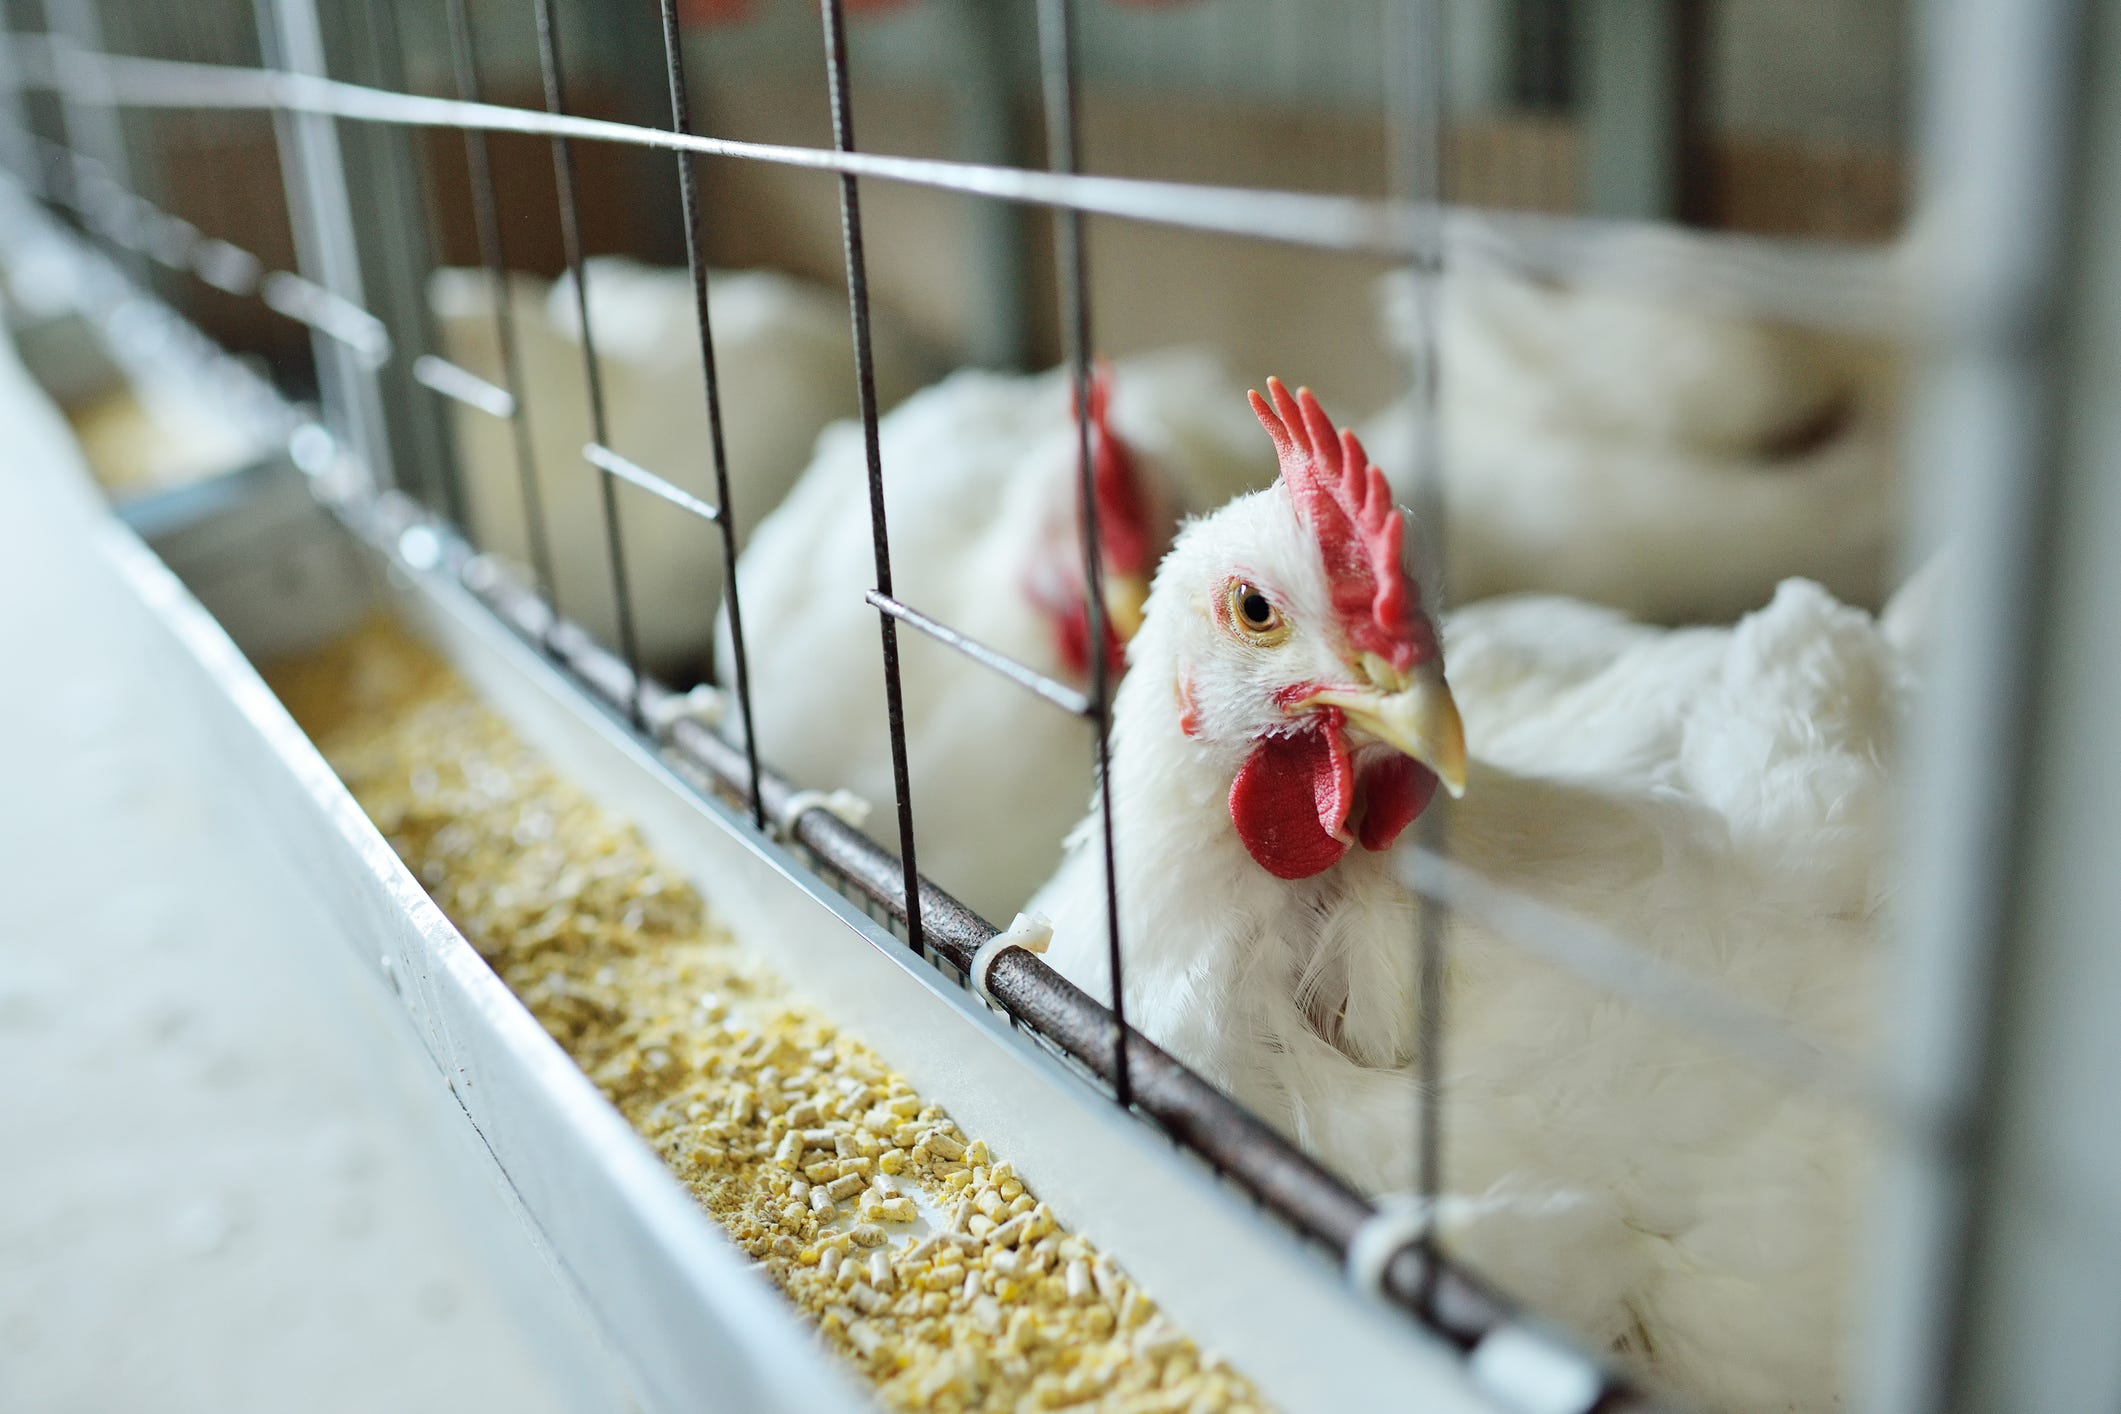 The bird flu outbreak is spilling over into mammals. What does that mean for humans?